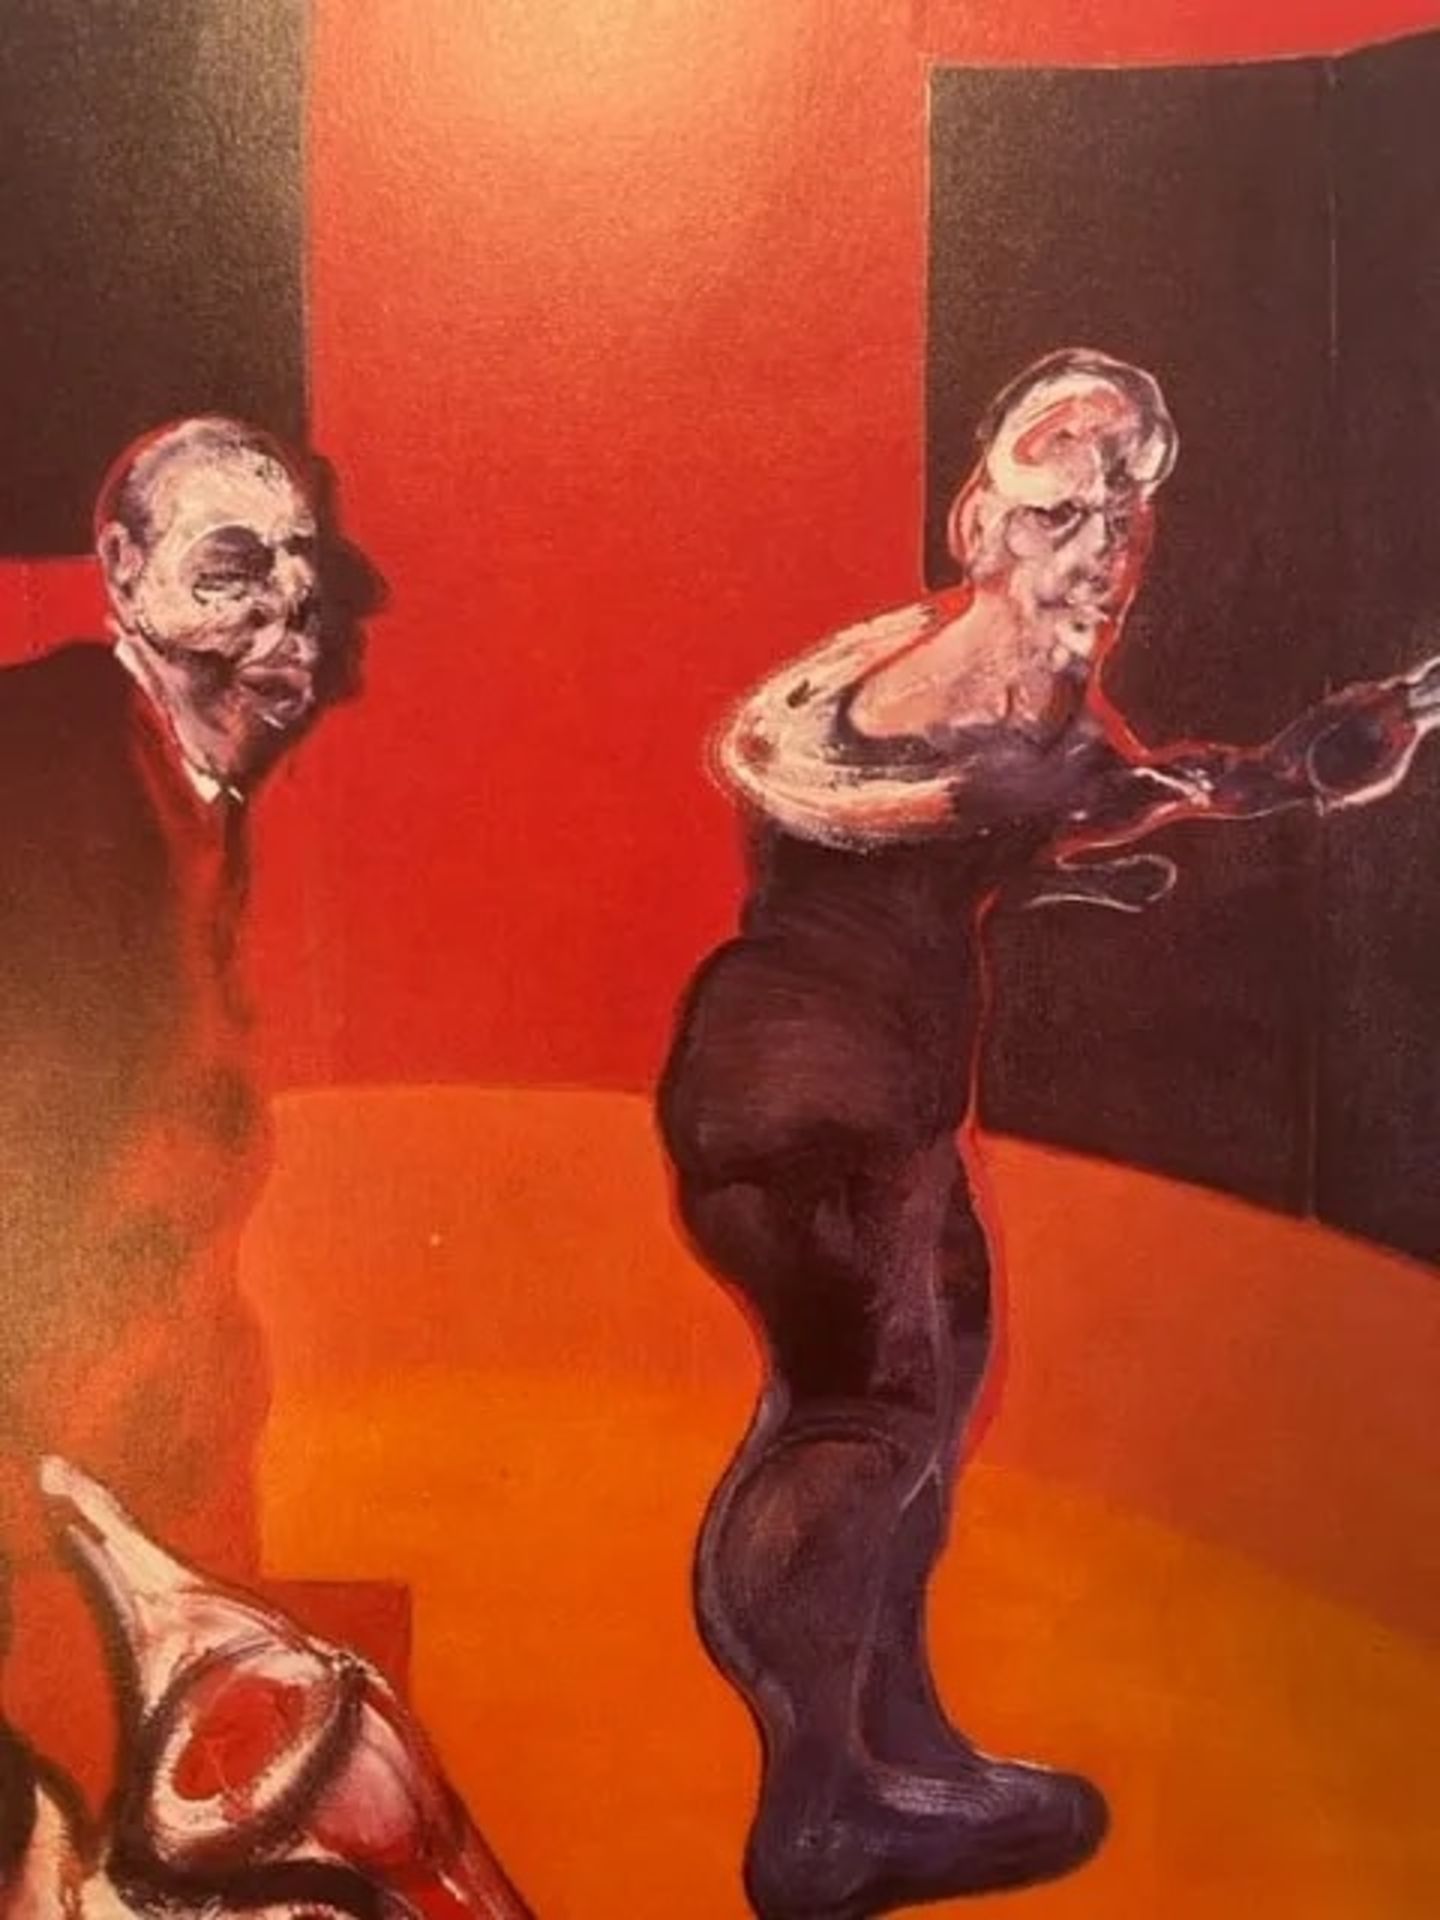 Francis Bacon "Three Studies for a Crucifixion" Print - Image 2 of 6